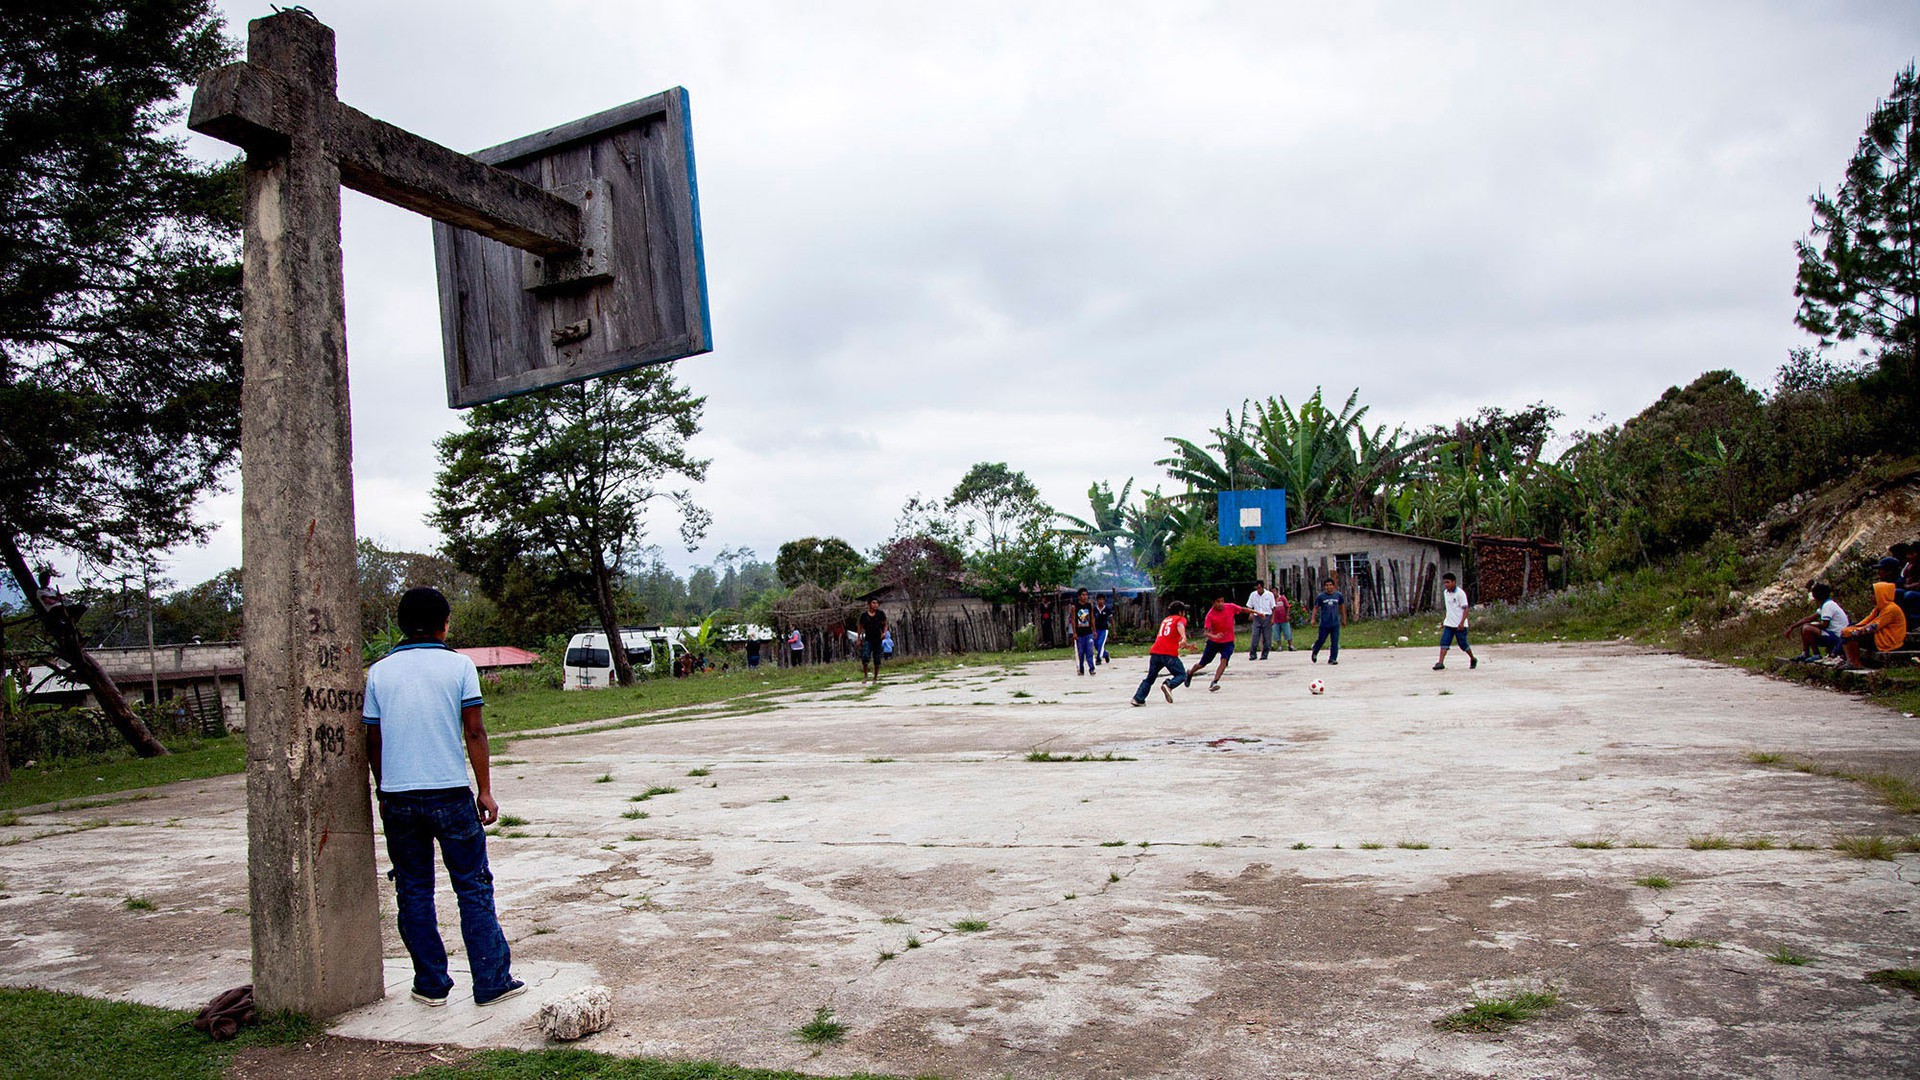 A group of indigenous people play soccer on a basketball court in a Zapatista village in Chiapas, Mexico March 13, 2014. (Photo by Connor Radnovich.)